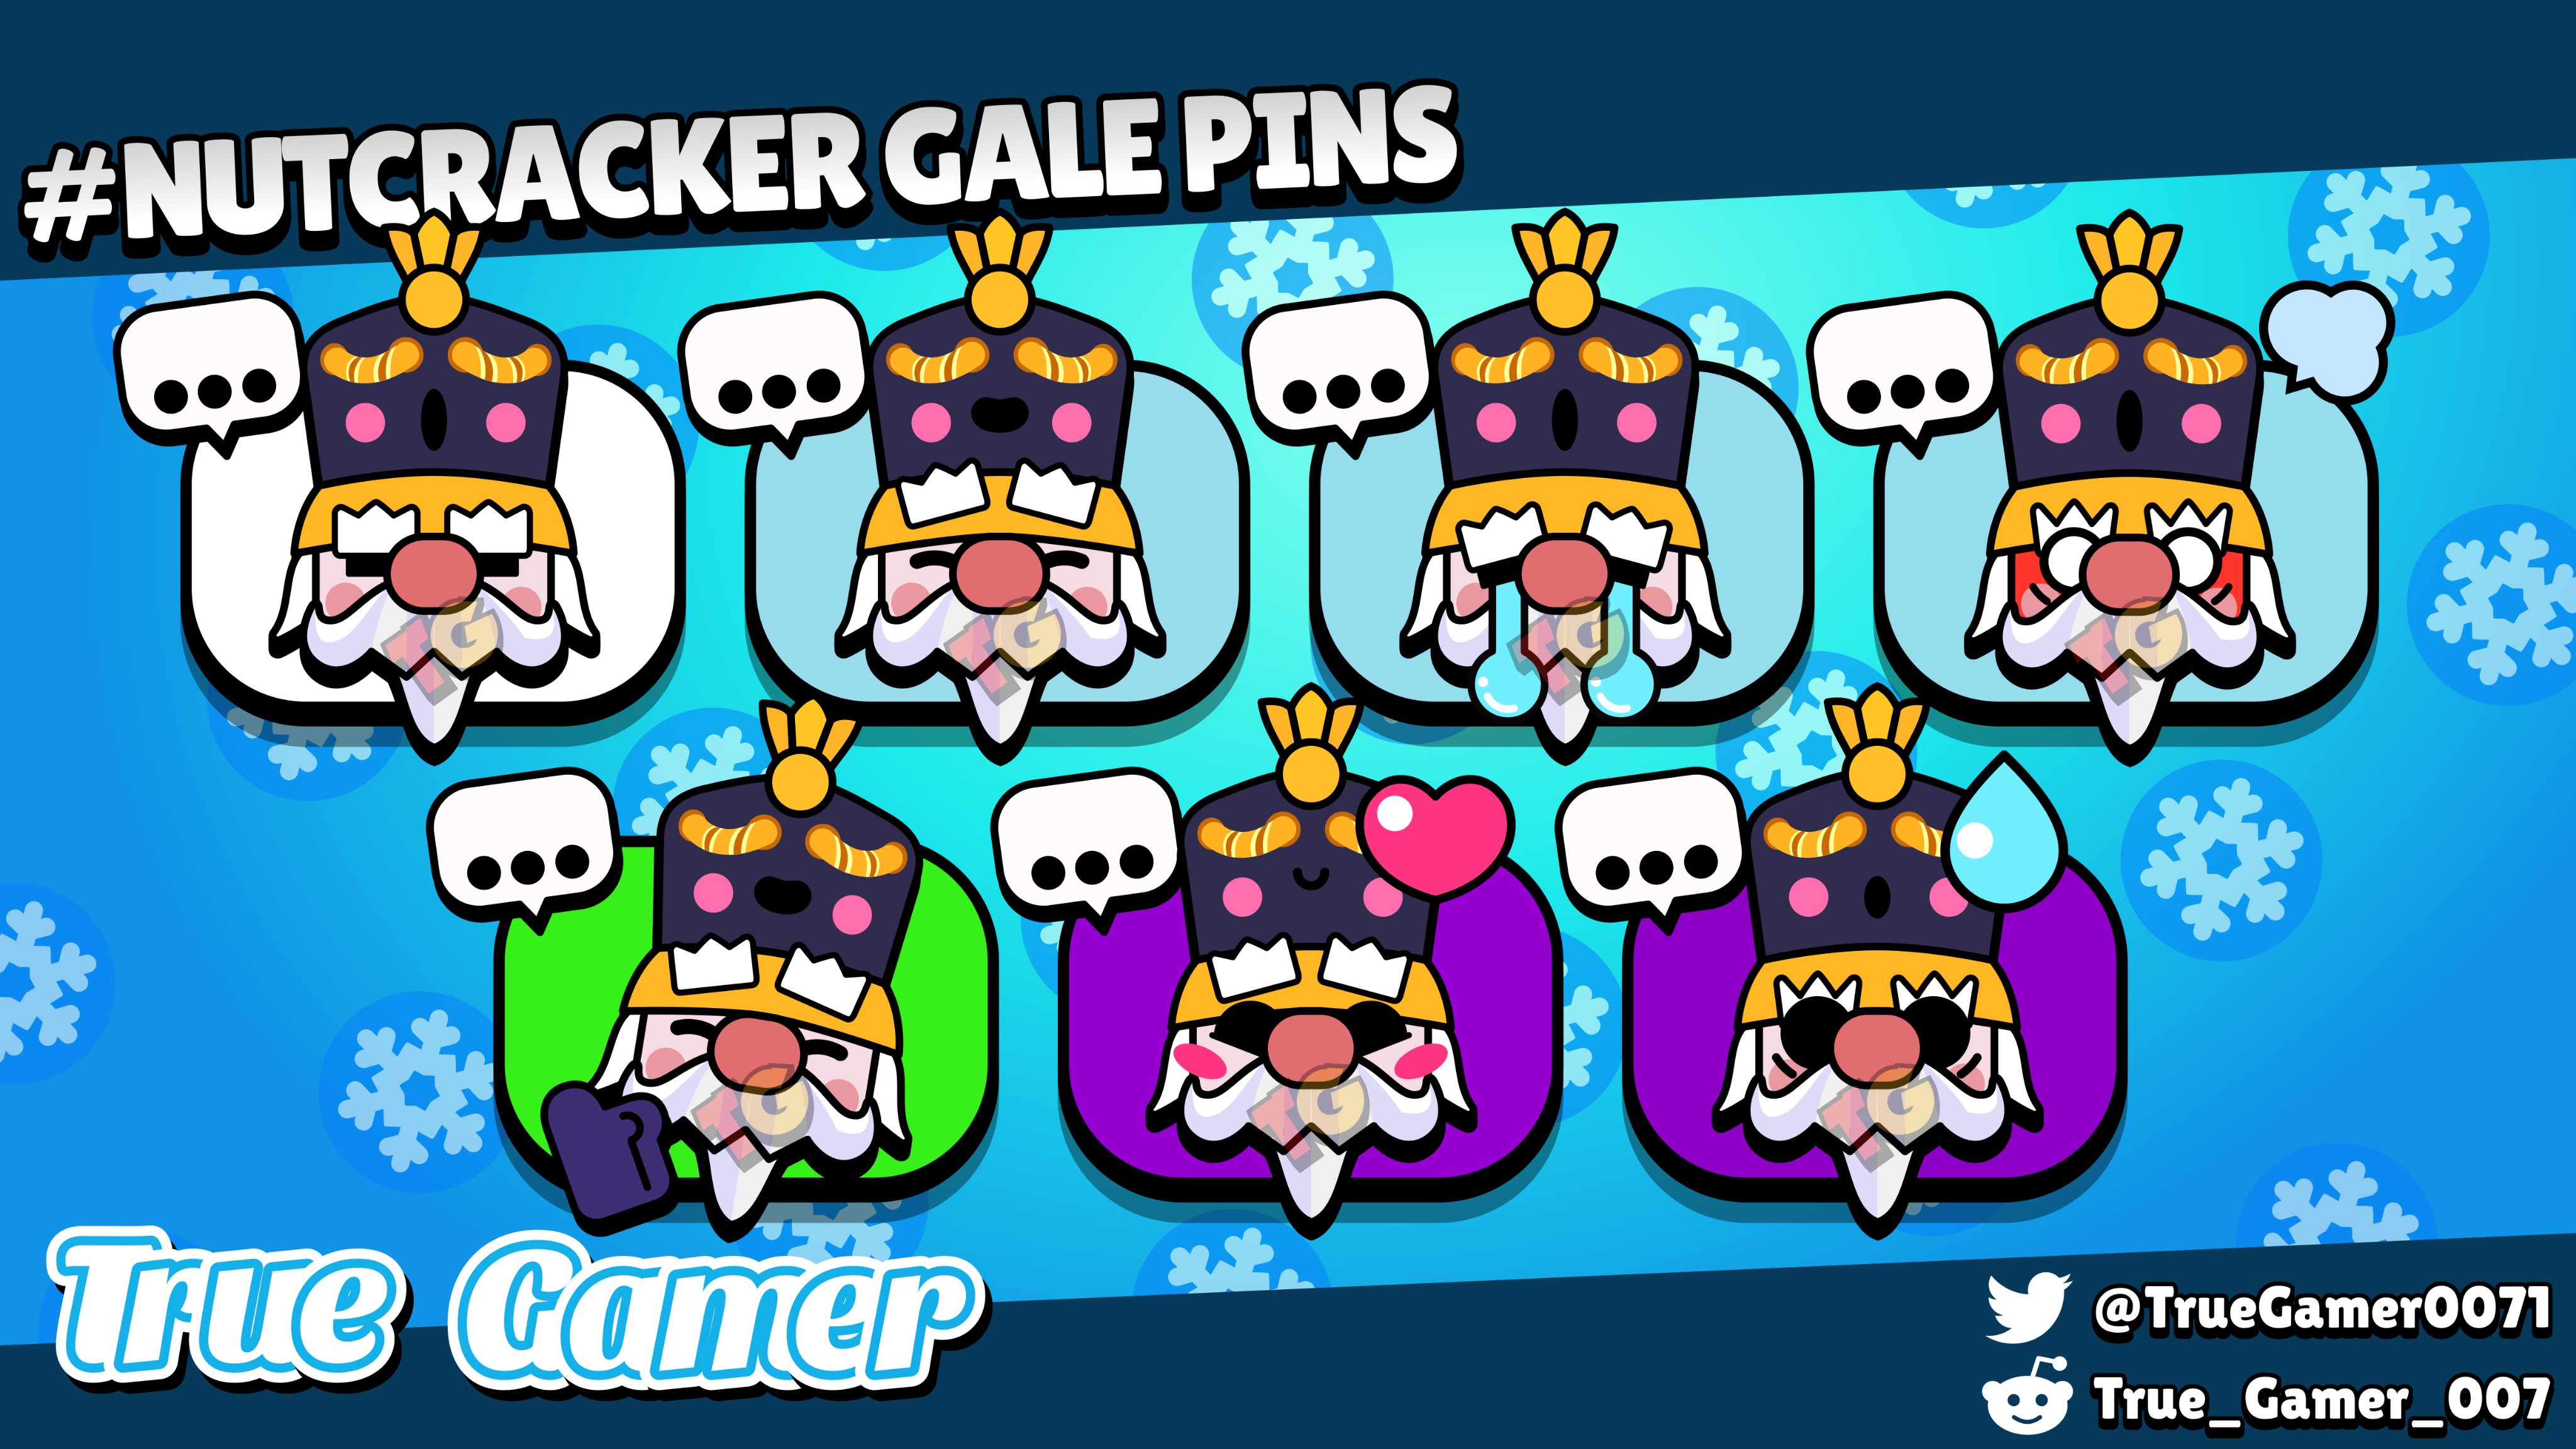 Truegamer007 On Twitter Brawlstars Brawlerpins Nutcrackergale Never Too Old Be A Bit Bold Nutcracker Gale Pins Hype For The Brawl O Ween Update Yt Making Nutcracker Gale Pins Timelapse Brawlidays Supercell Make Conte - brawl stars new conte